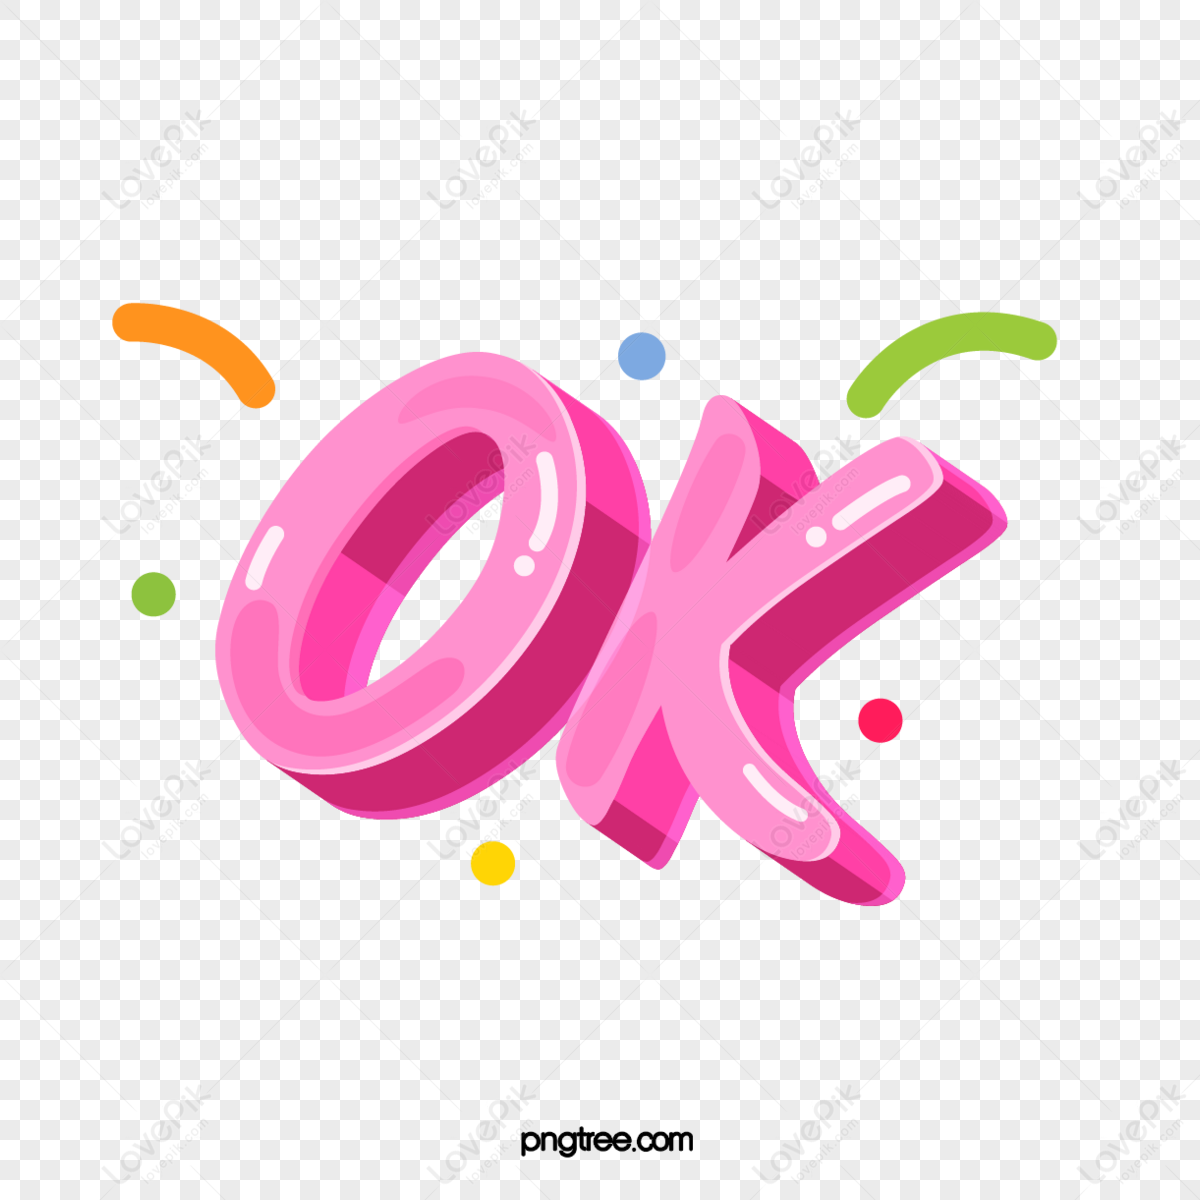 Ok button icon interface icon Accept icon, Computer And Media 1 Icon, Logo,  Fk Crvena Zvezda, Black And White , Frame, Meter transparent background PNG  clipart